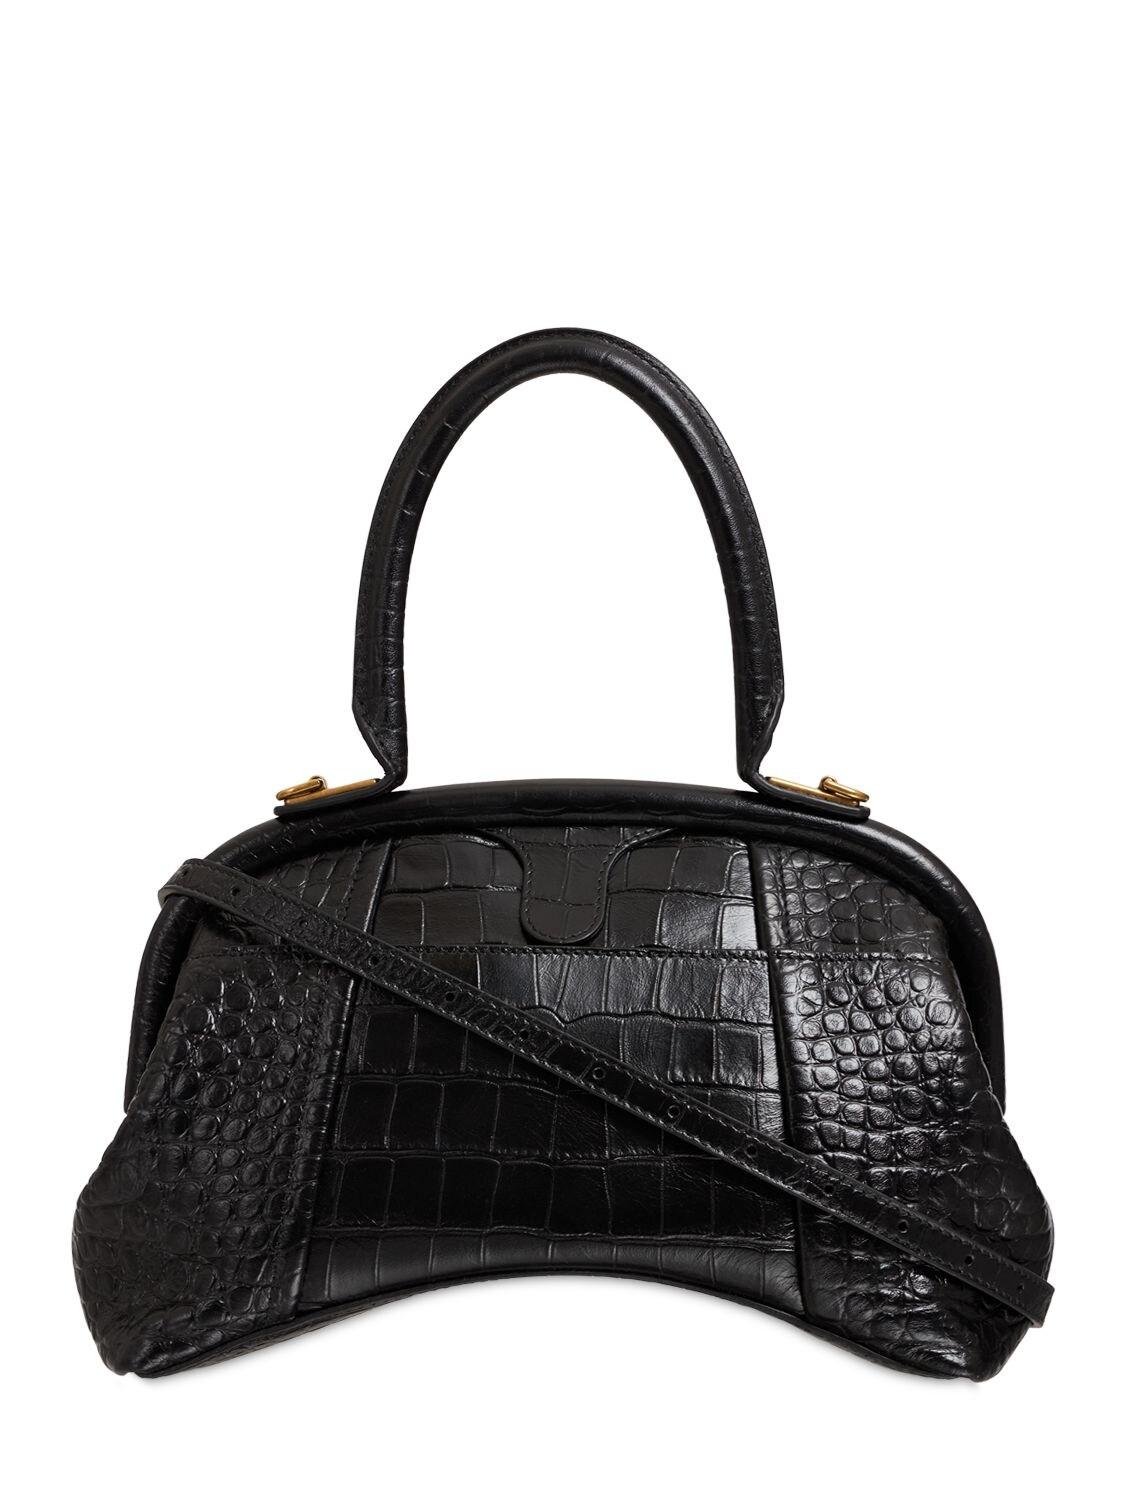 Balenciaga Small Editor Embossed Leather Bag in Black | Lyst